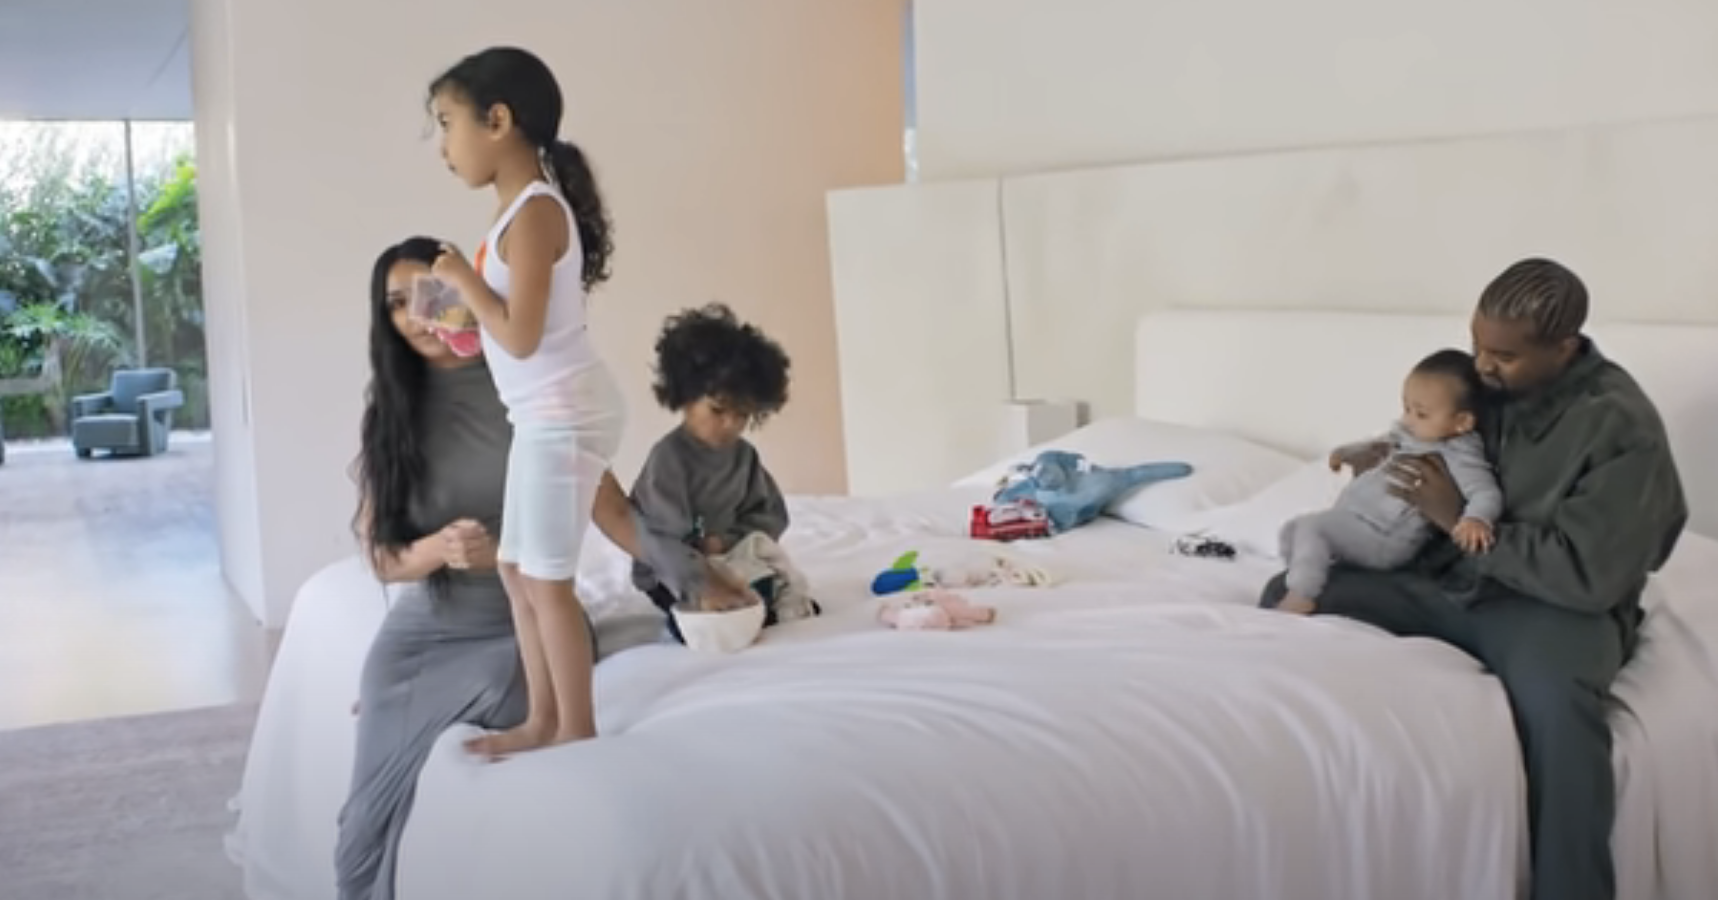 Kim sitting on a the bed with her kids and Kanye with the decor being much lighter and airy